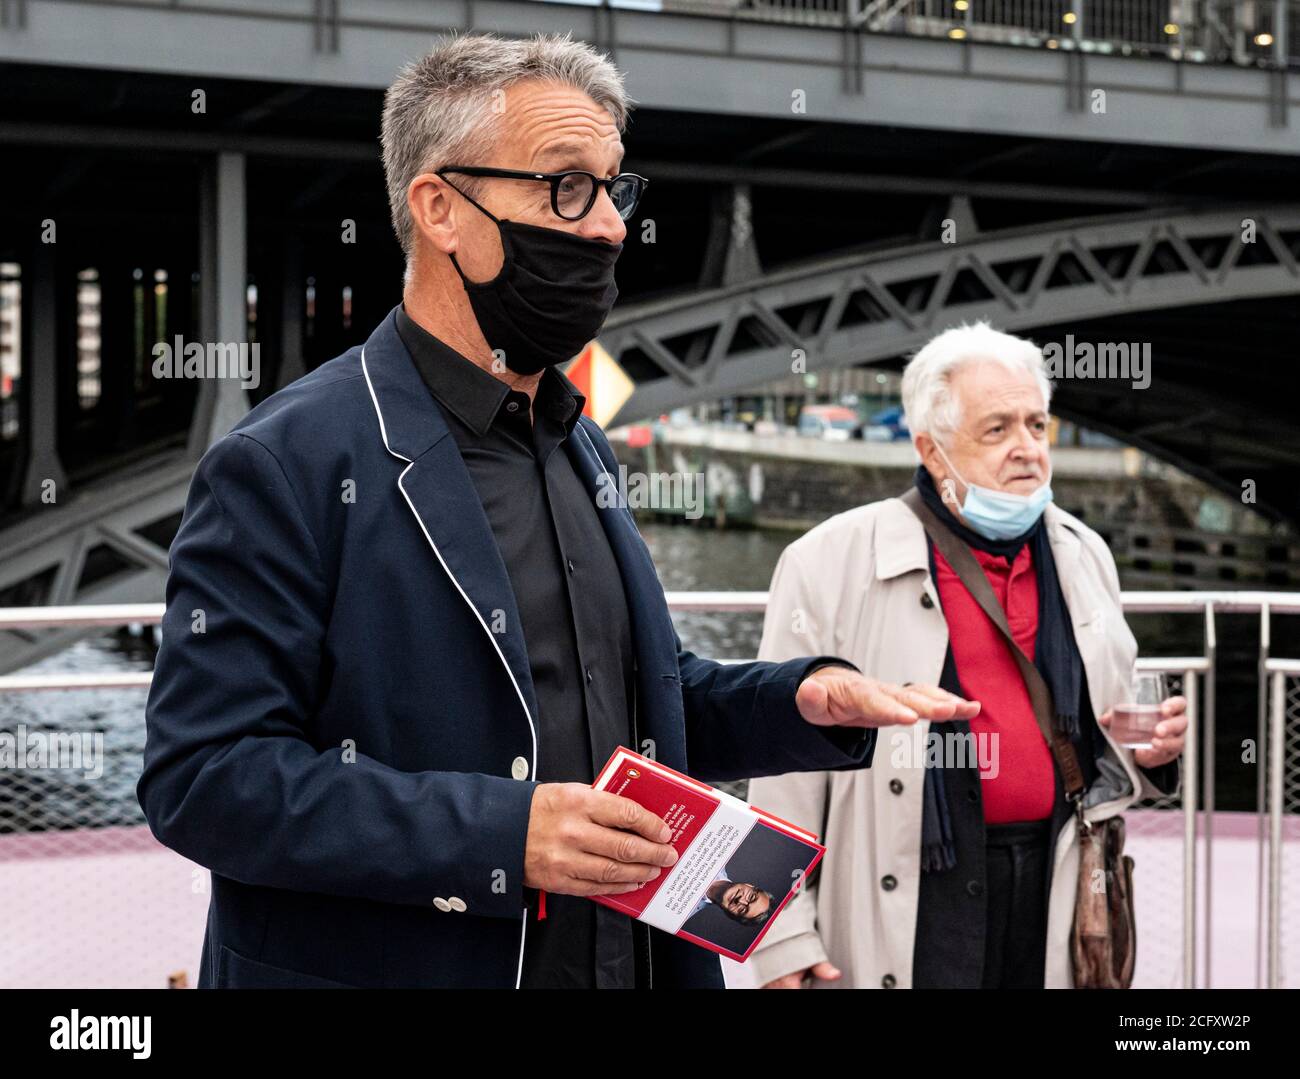 Berlin, Germany. 02nd Sep, 2020. Journalist Gabor Steingart gestures before the presentation of his new book 'The Inconvenient Truth: State of our Nation Address' on the editorial ship Pioneer One. In the background is Henryk M. Broder. Credit: Fabian Sommer/dpa/Alamy Live News Stock Photo